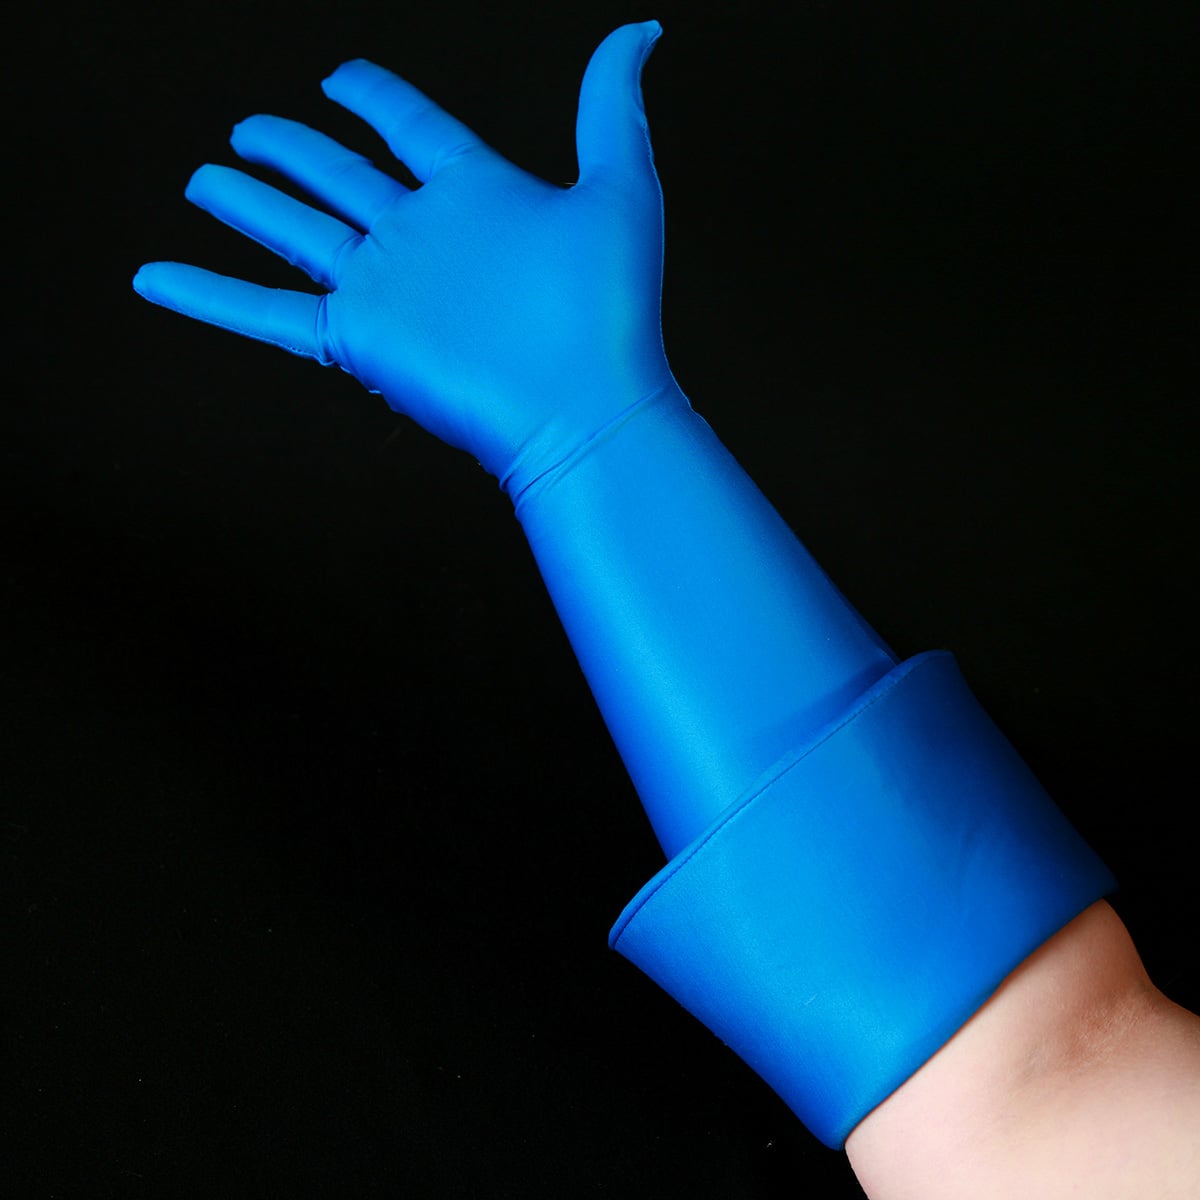 An elbow length blue glove with a wide blue cuff.